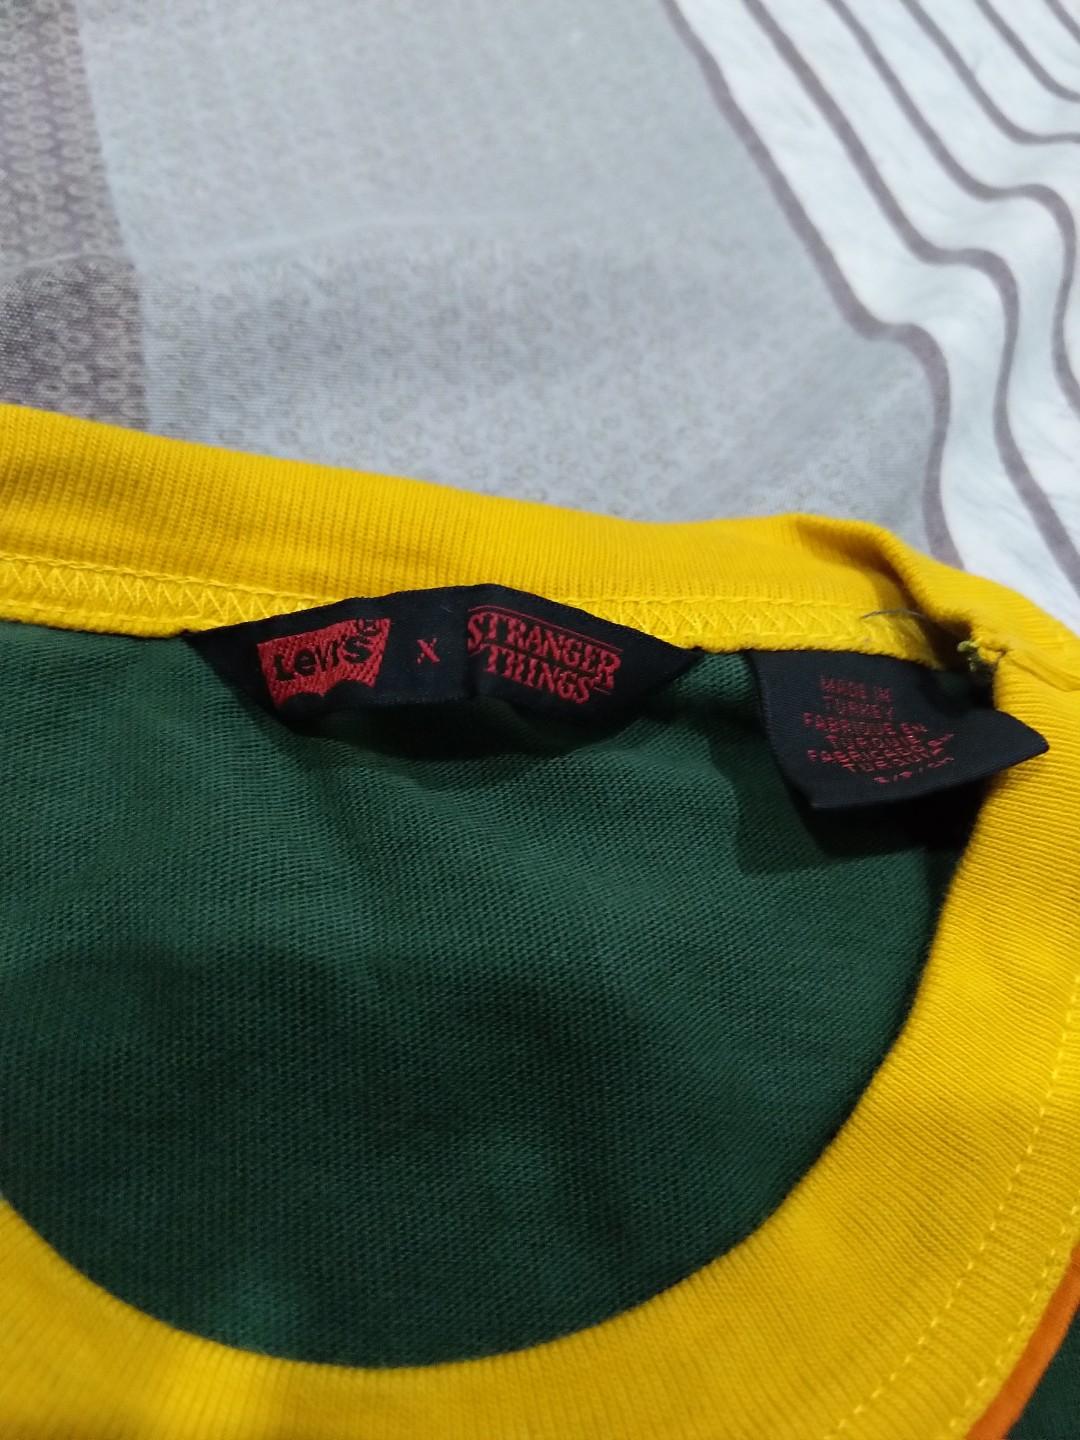 ORIGINAL 2019 Levi's x Stranger Things Camp Know Where Shirt, Men's  Fashion, Tops & Sets, Formal Shirts on Carousell